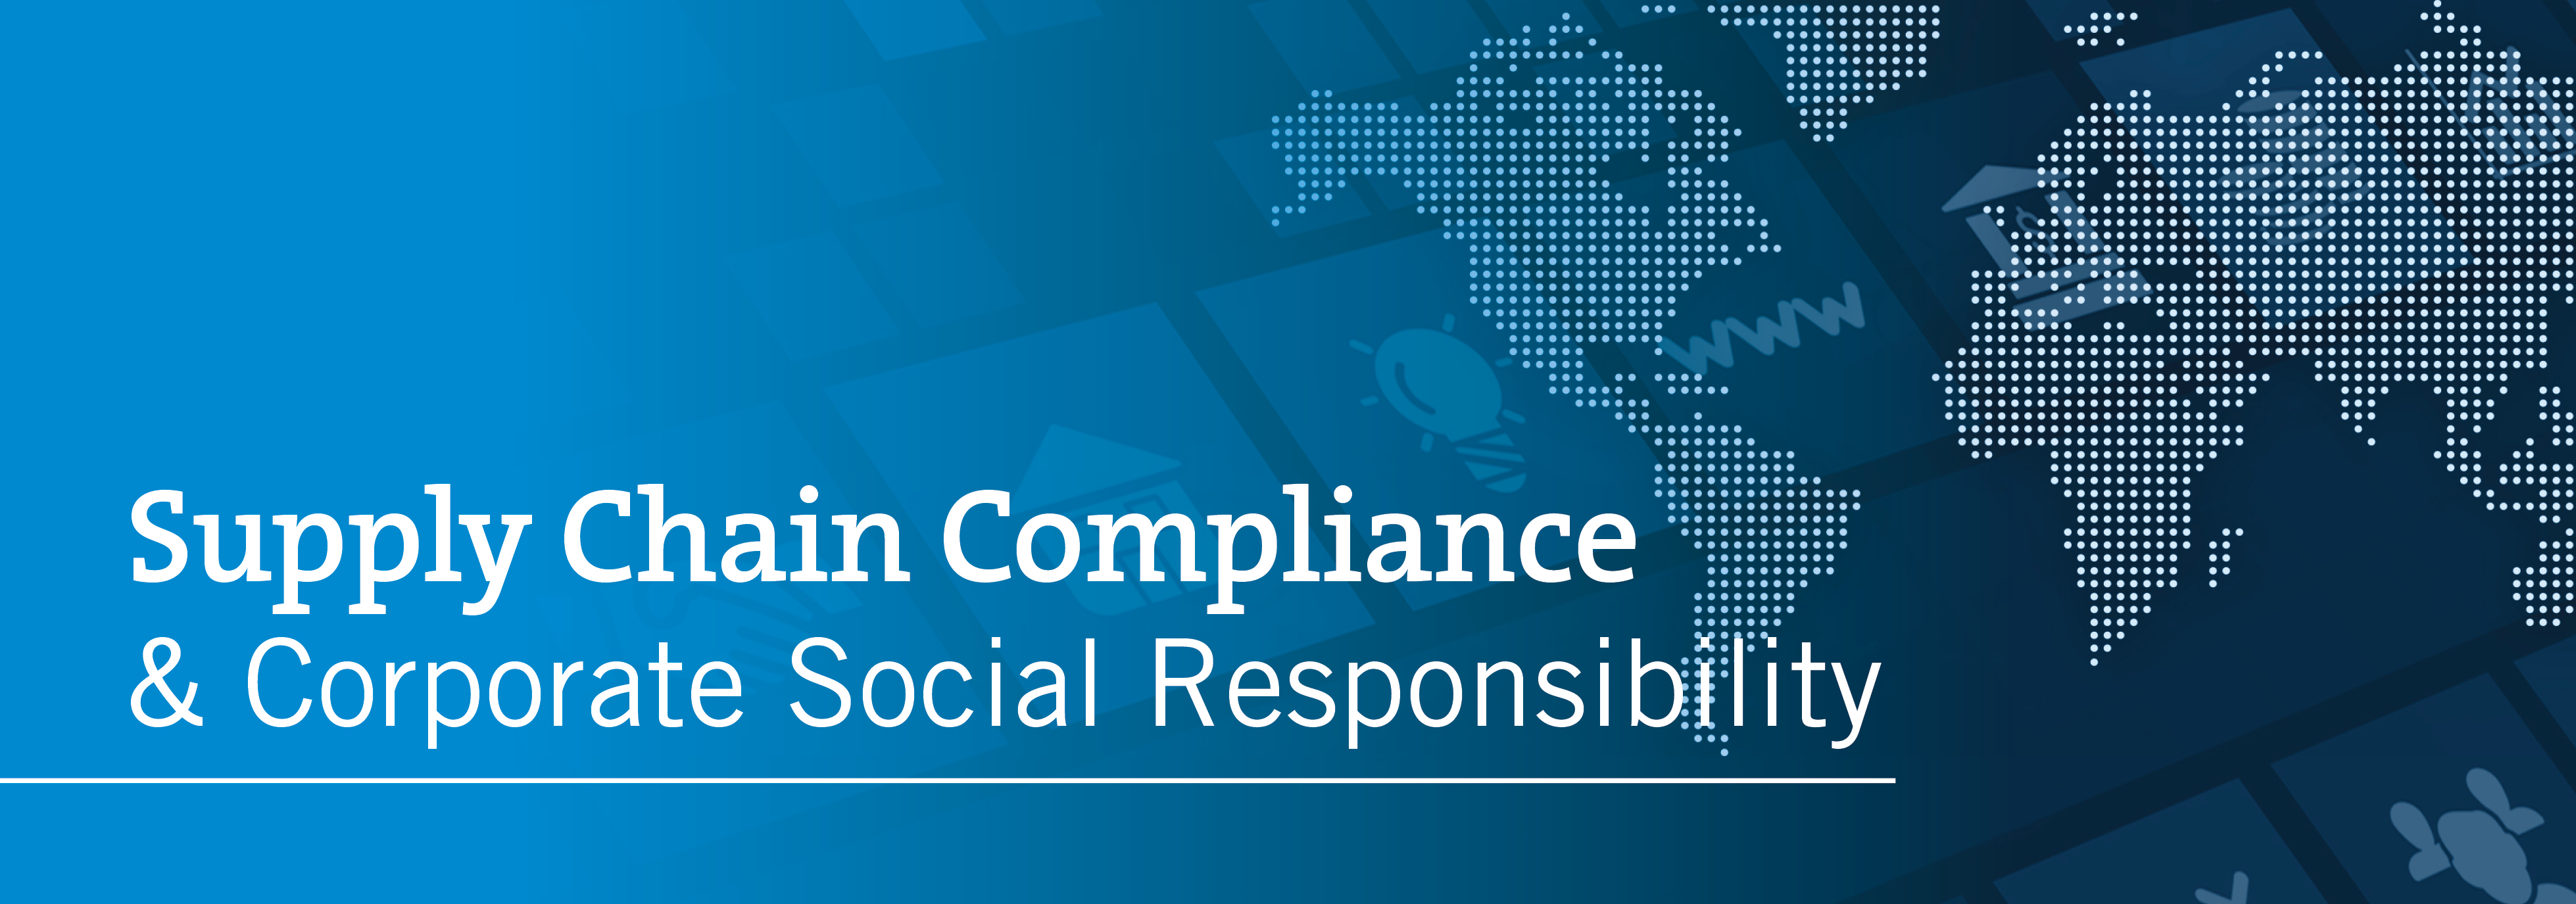 supply-chain-compliance-and-corporate-social-responsibility